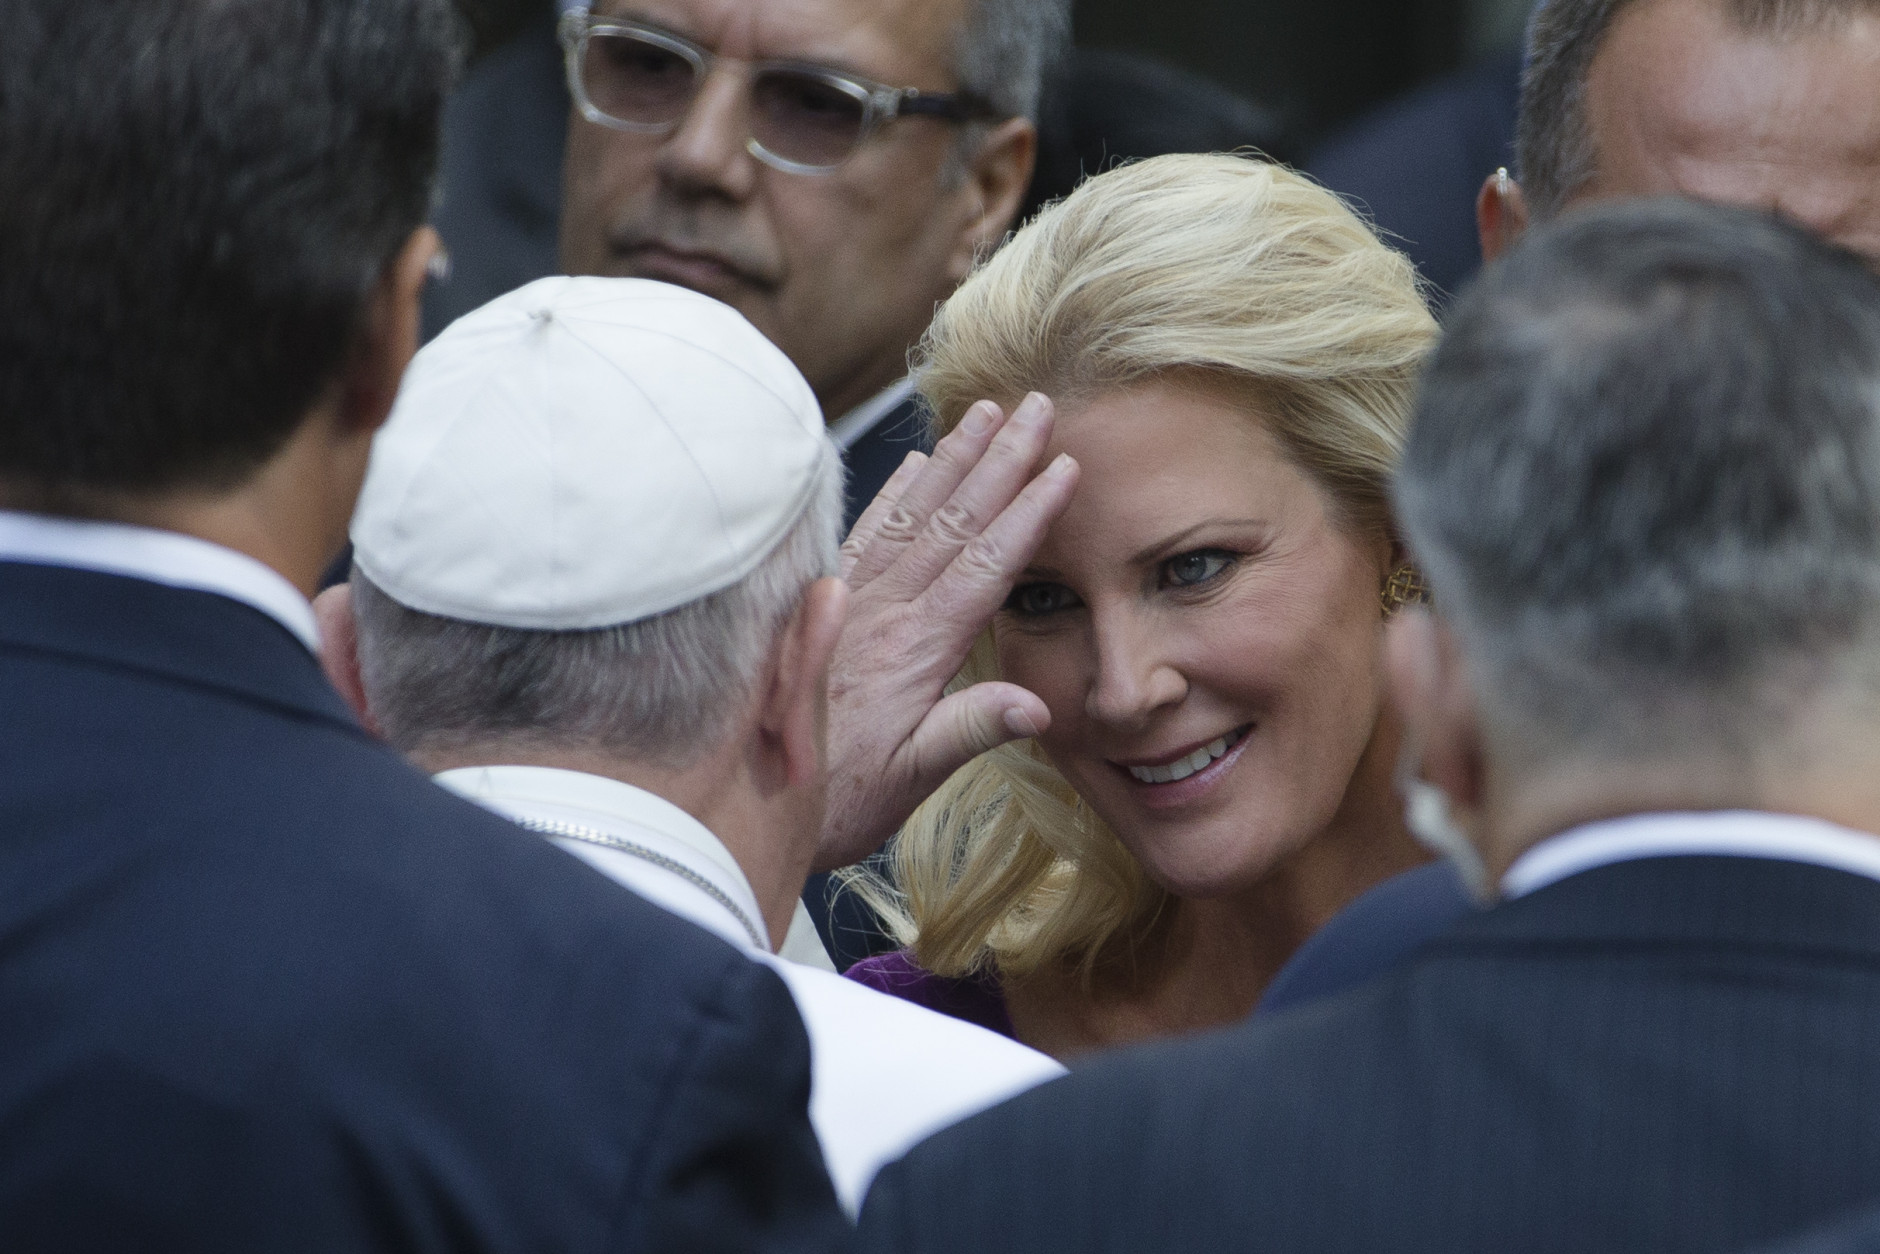 Pope Francis, center left, blesses Sandra Lee, partner of New York Governor Andrew Cuomo, at the South Pool of the 9/11 Memorial in downtown Manhattan, Friday, Sept. 25, 2015, in New York. (AP Photo/John Minchillo)